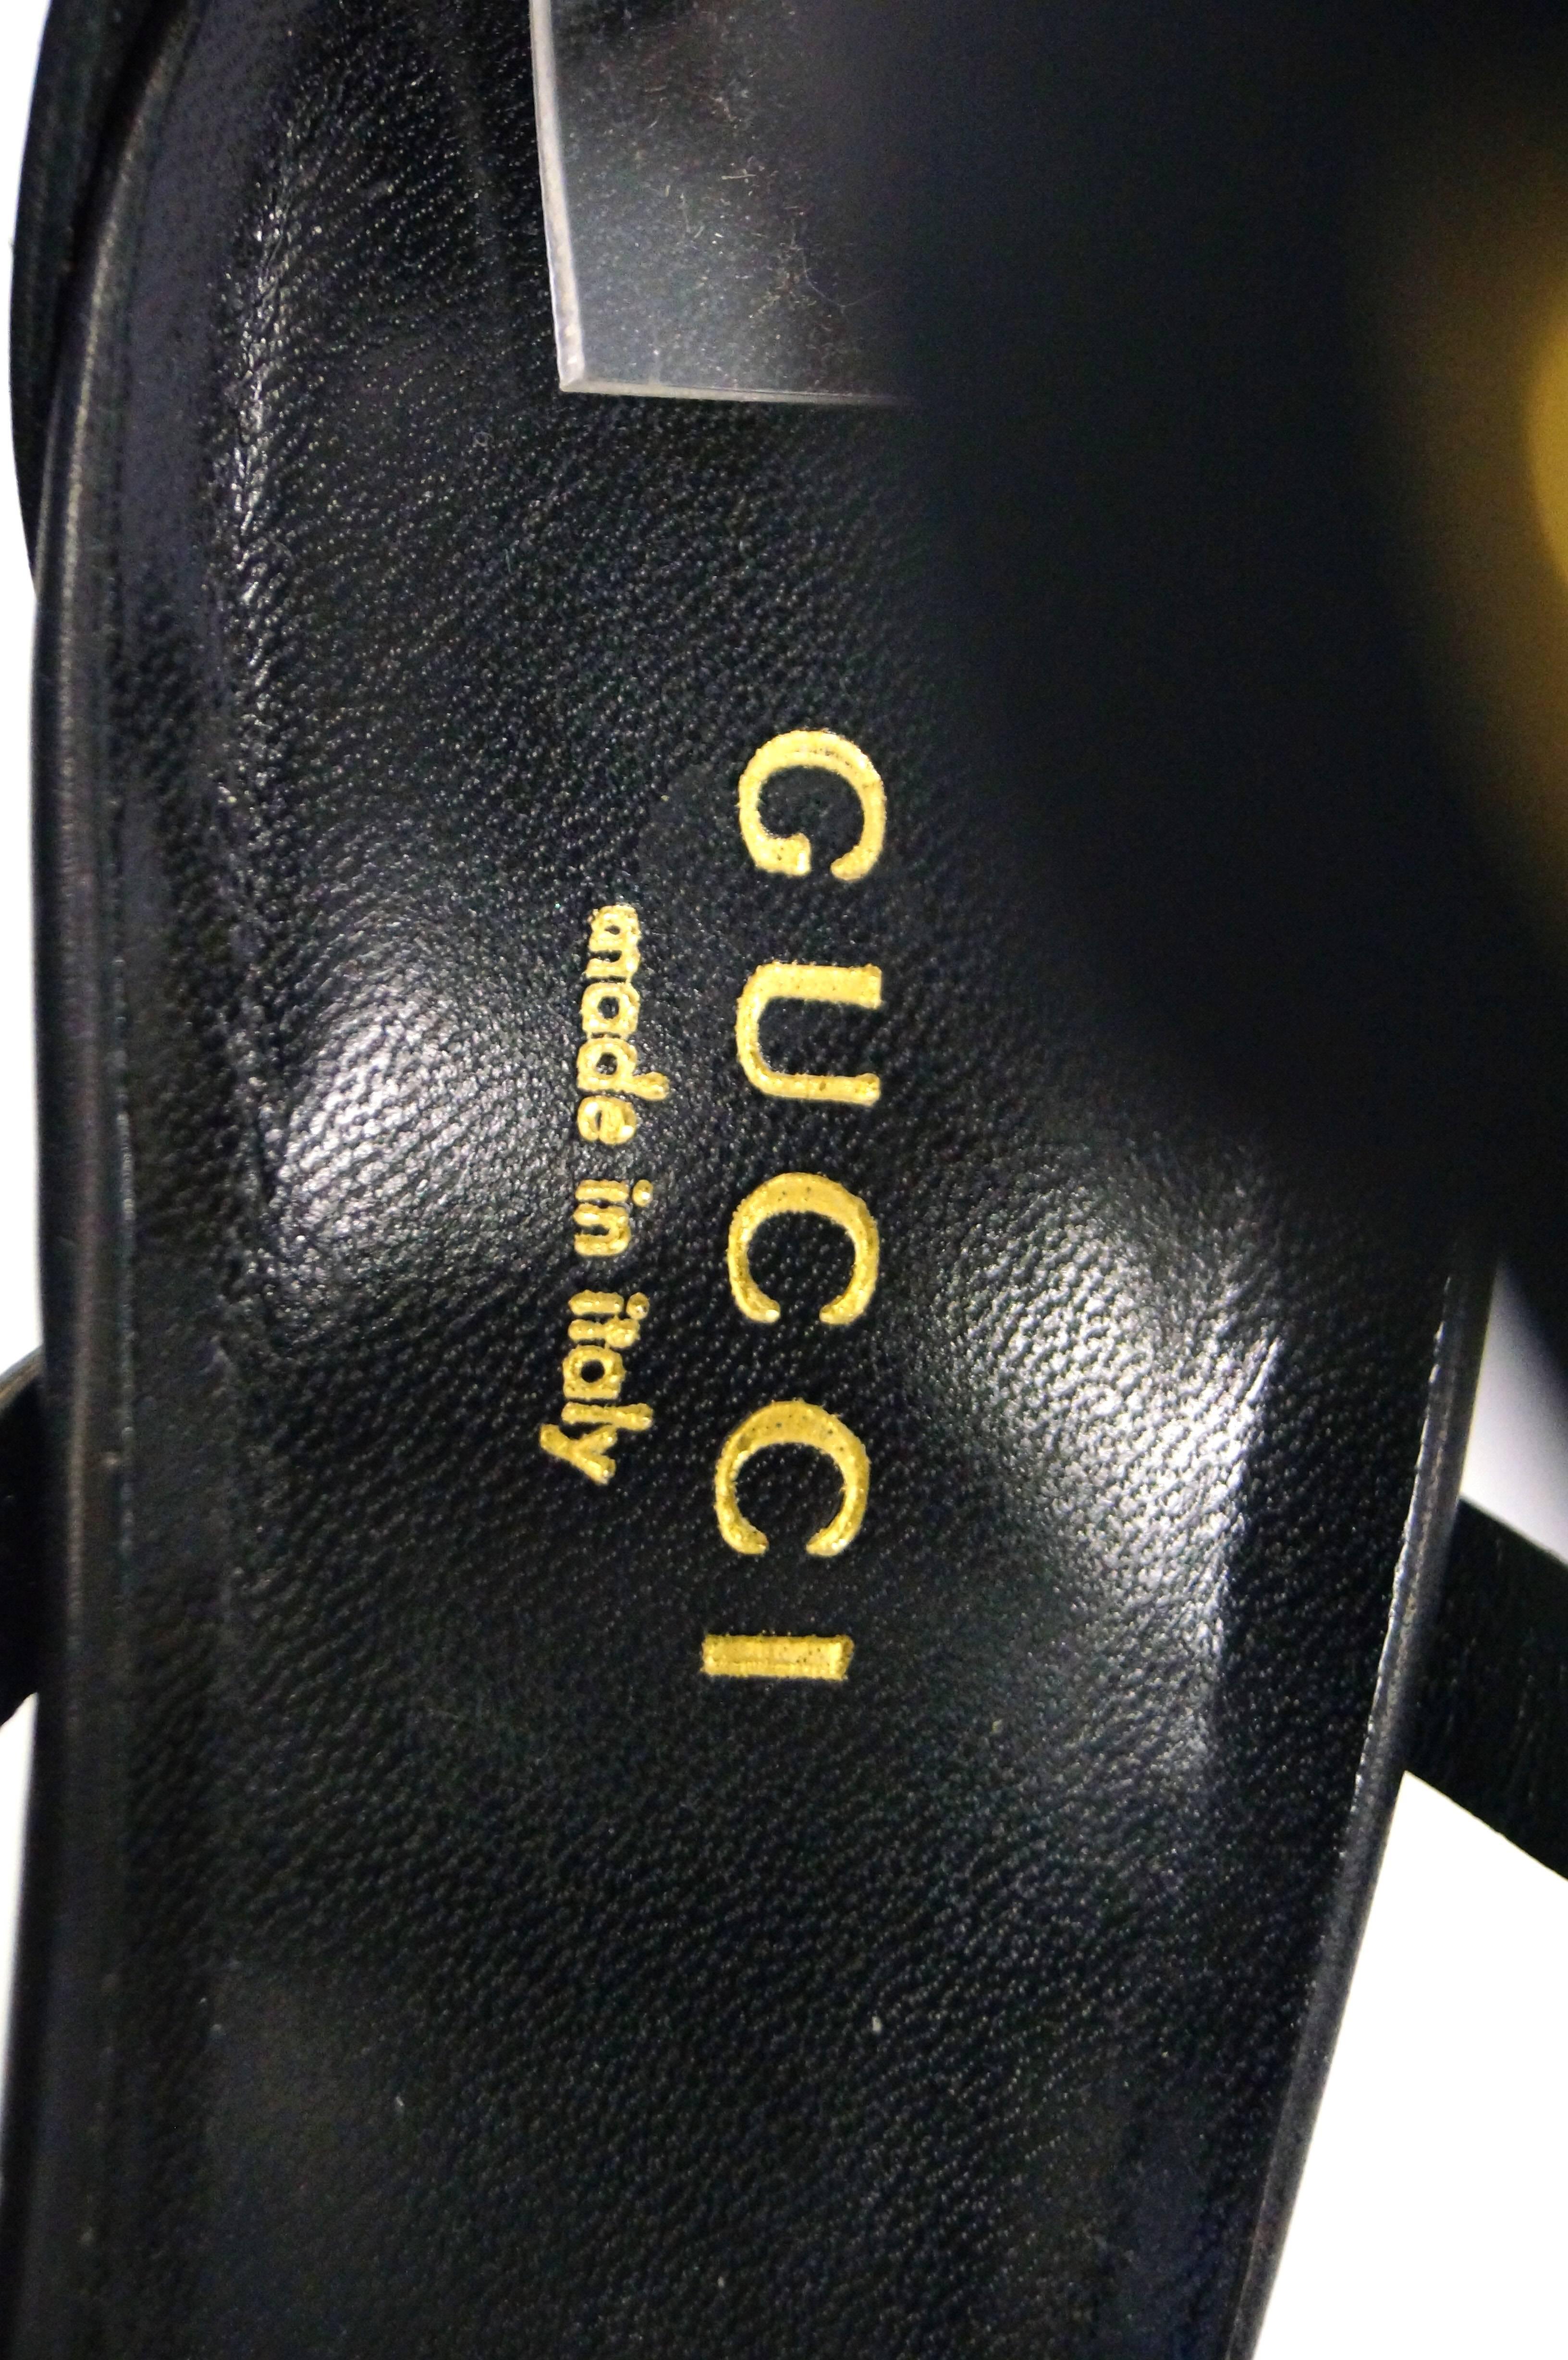 Tom Ford for Gucci Black Ankle Strap with Horsebit Logo Heels, 2000s  5